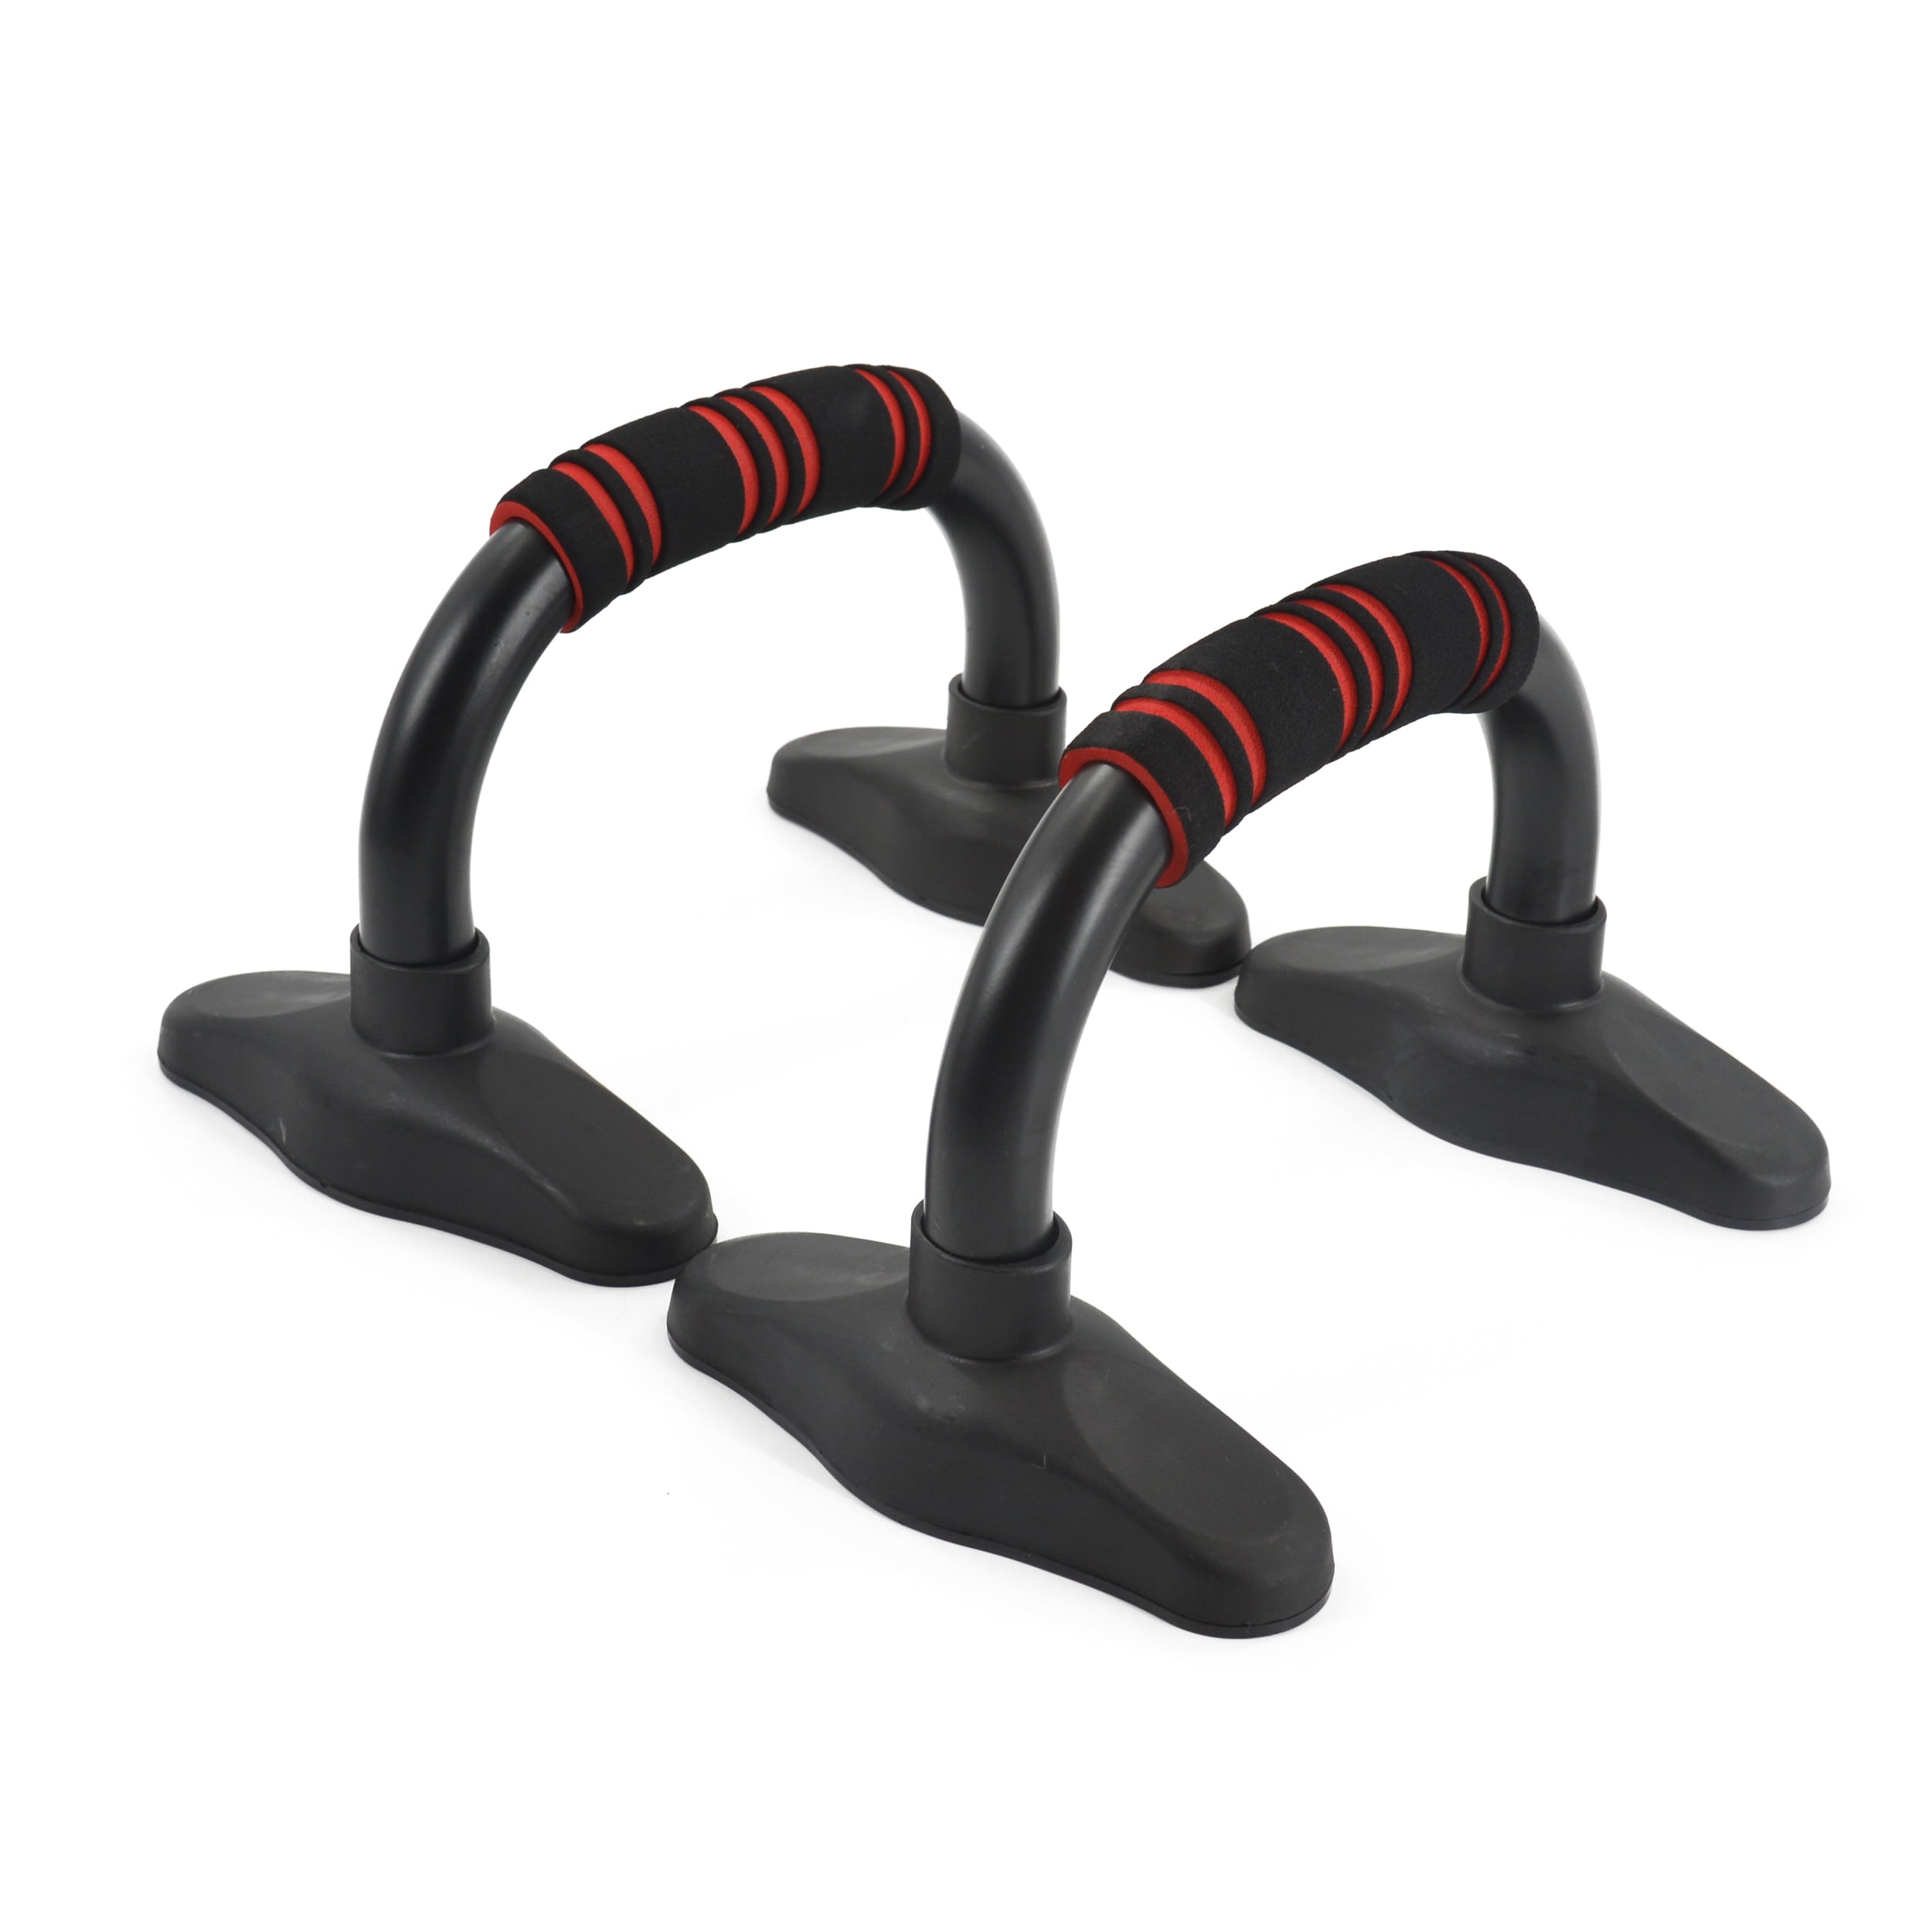 2 PC Rotating Push Up Stand Bars with Handle Grip Non-Slip for Home Gym Workout 